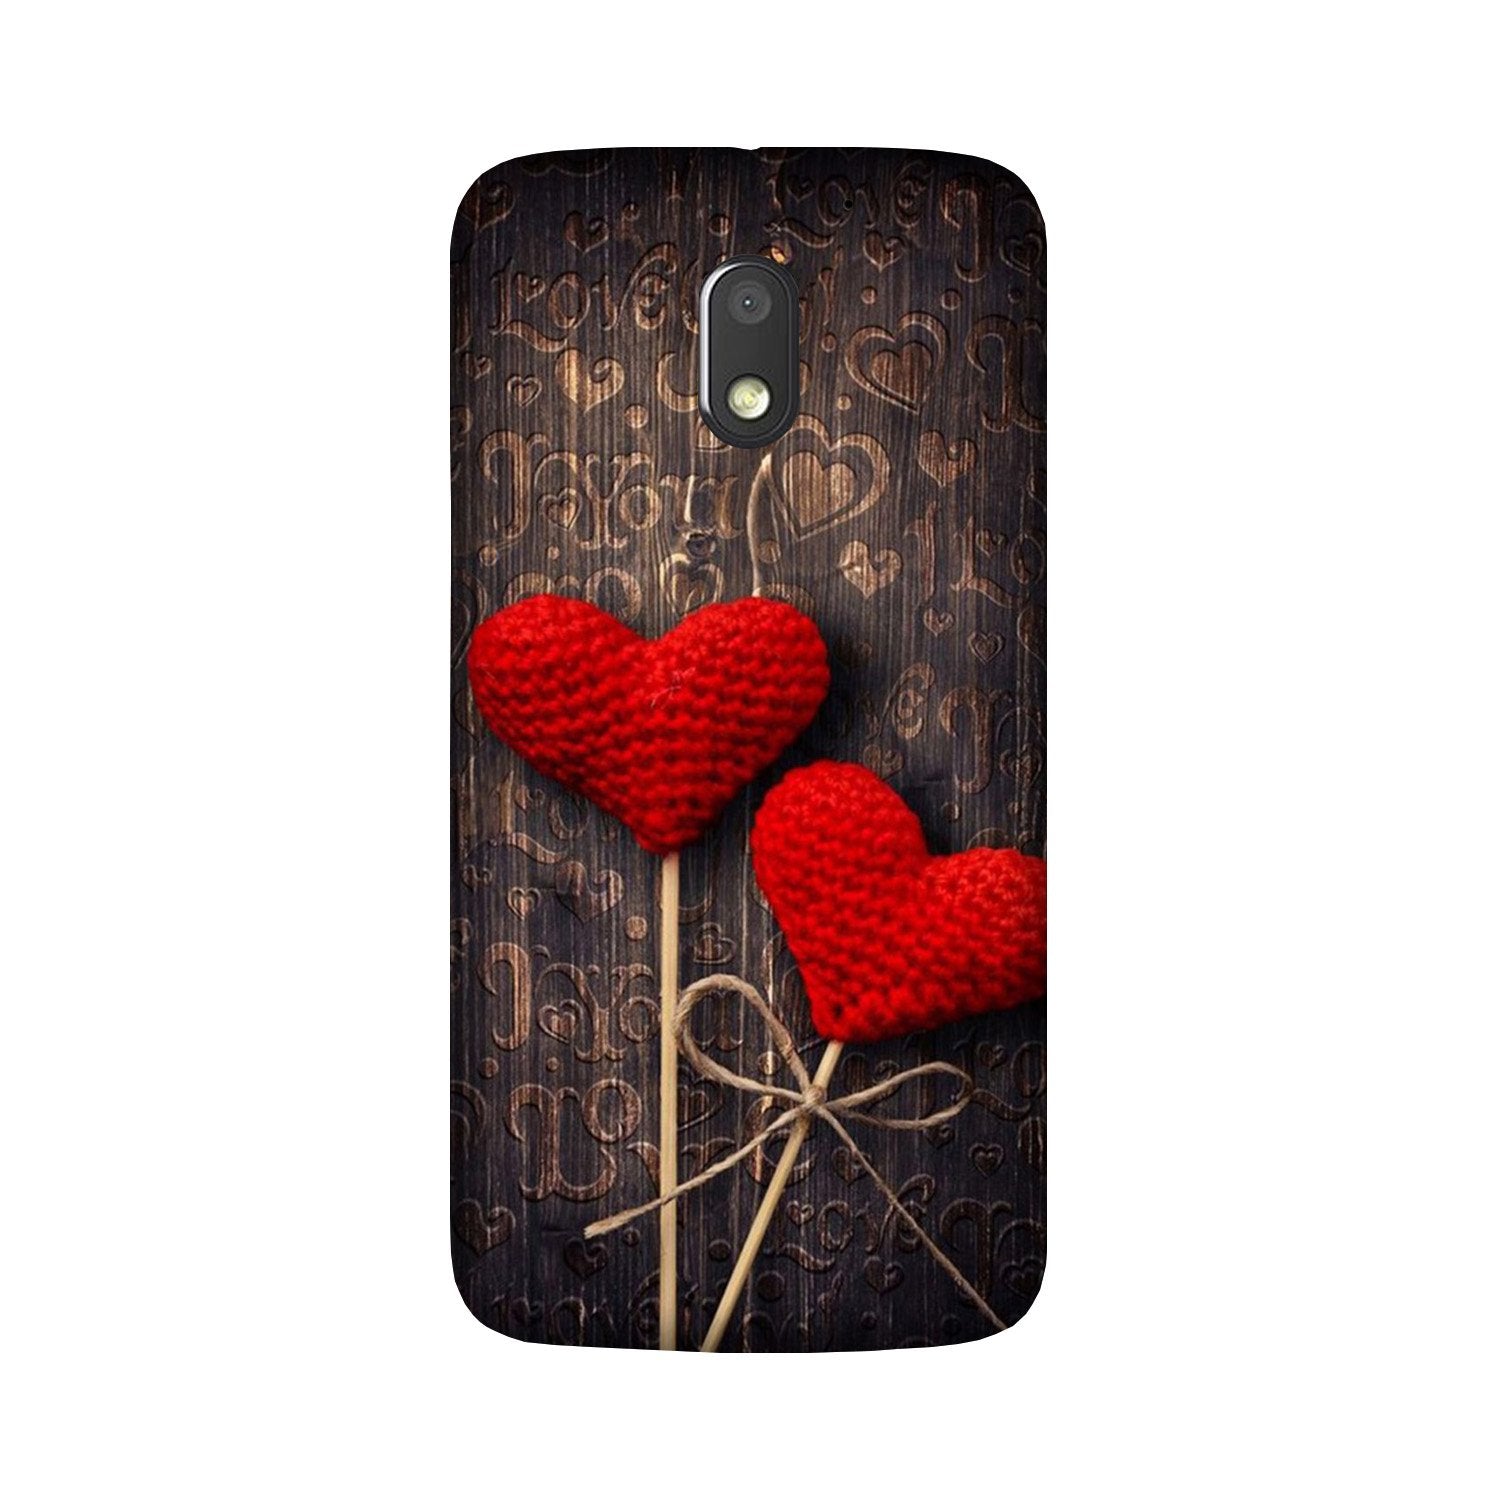 Red Hearts Case for Moto E3 Power